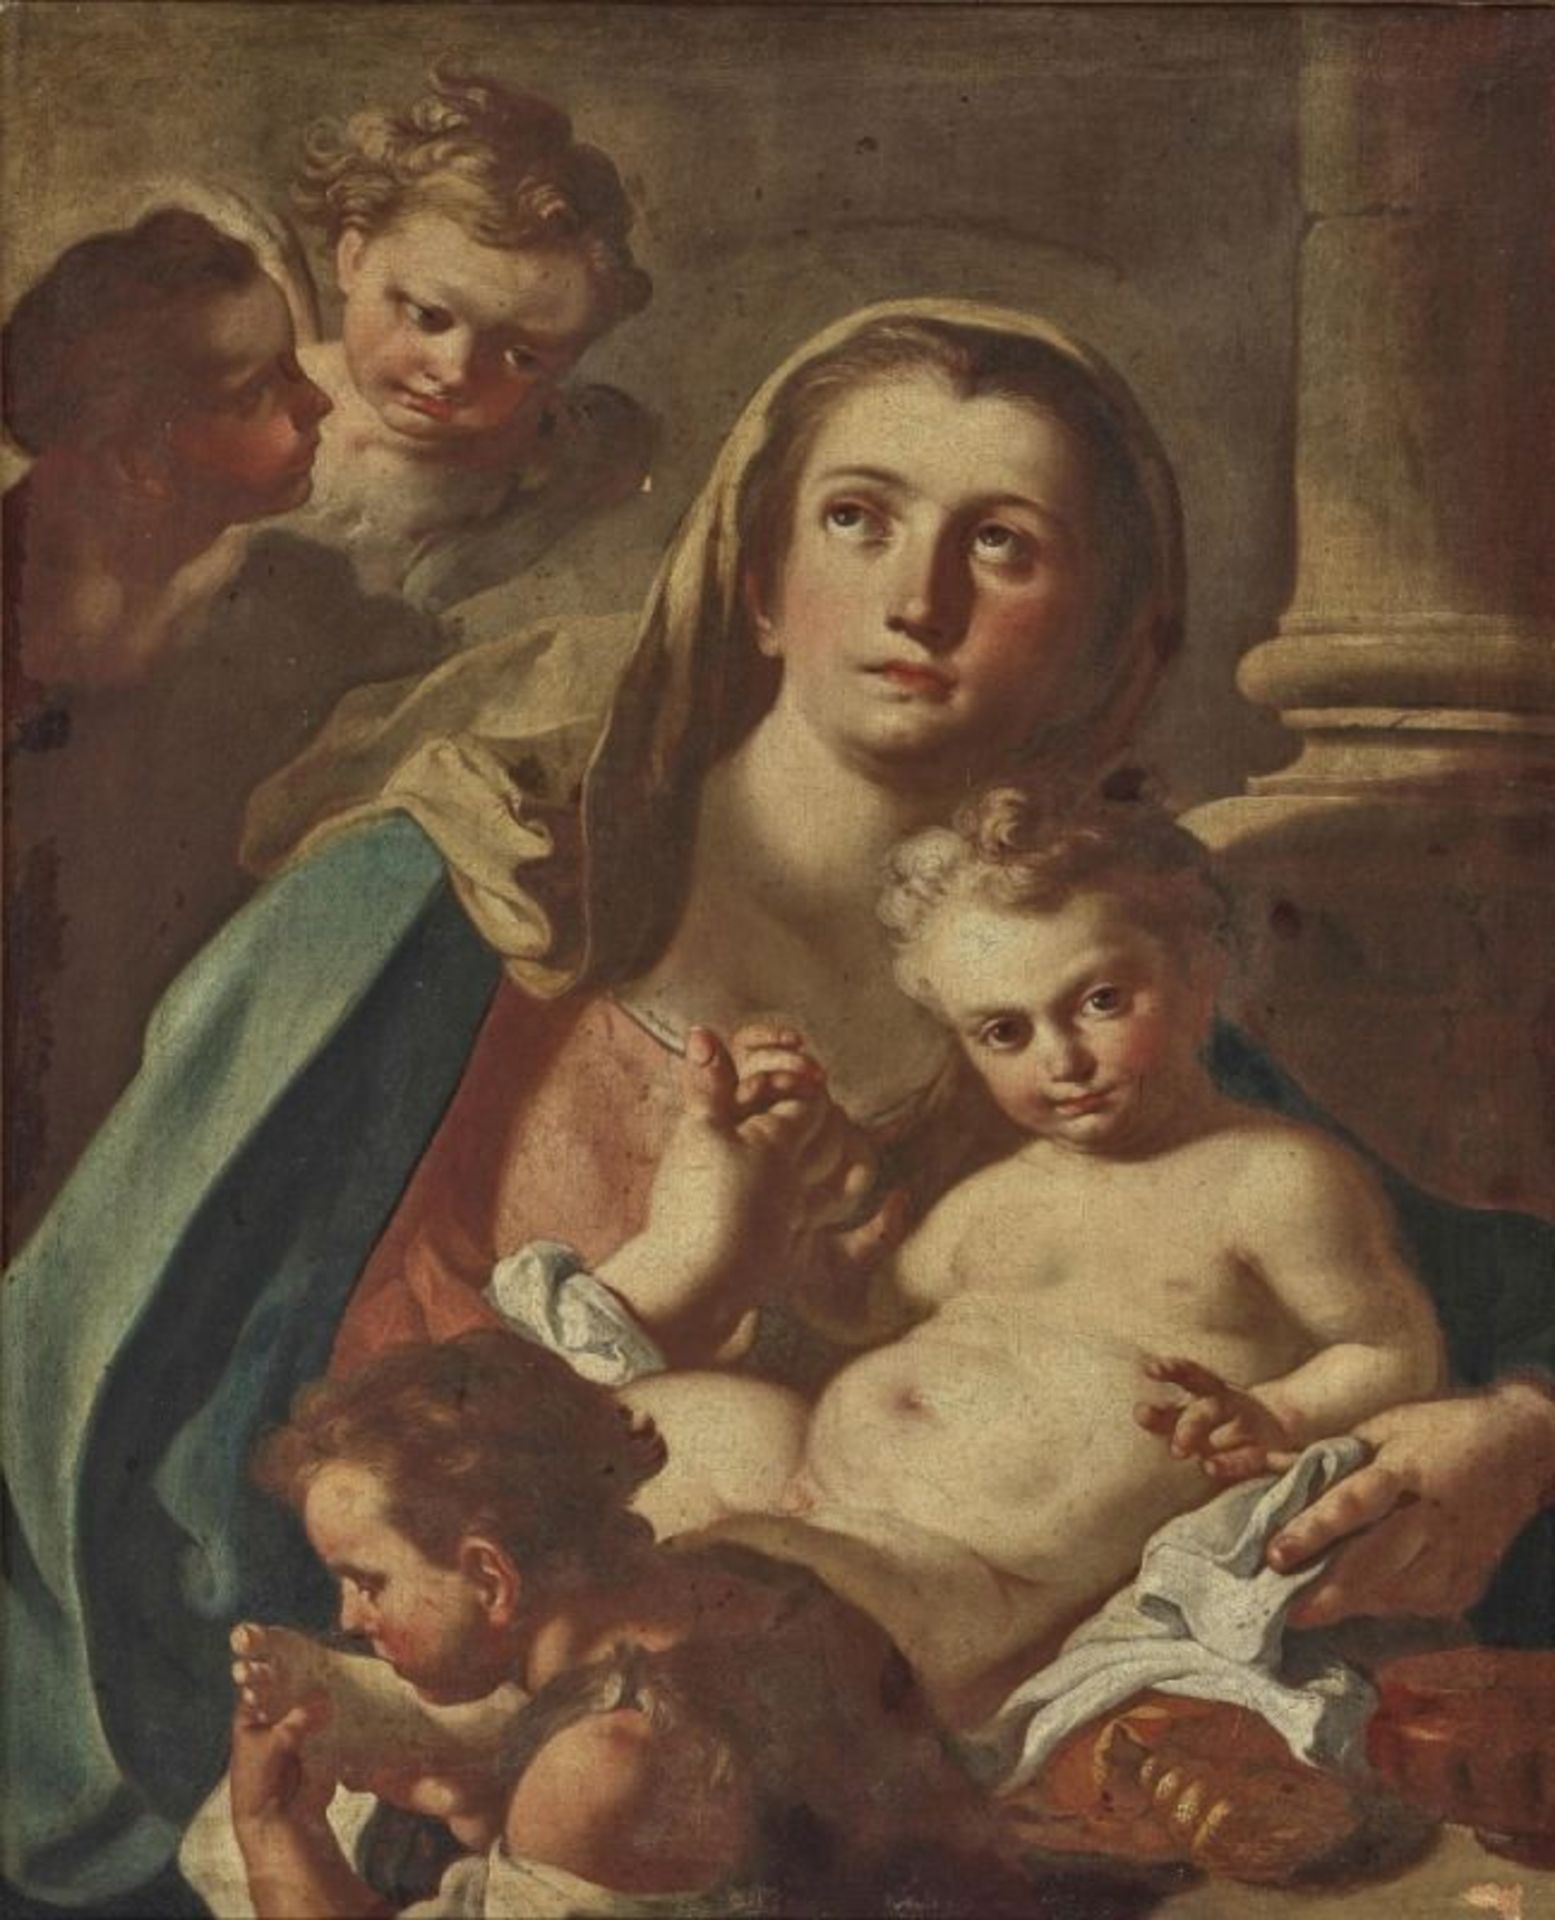 (Attributed to) Mura, Francesco deMadonna and Child and John the Baptist as a Boy Oil on canvas.